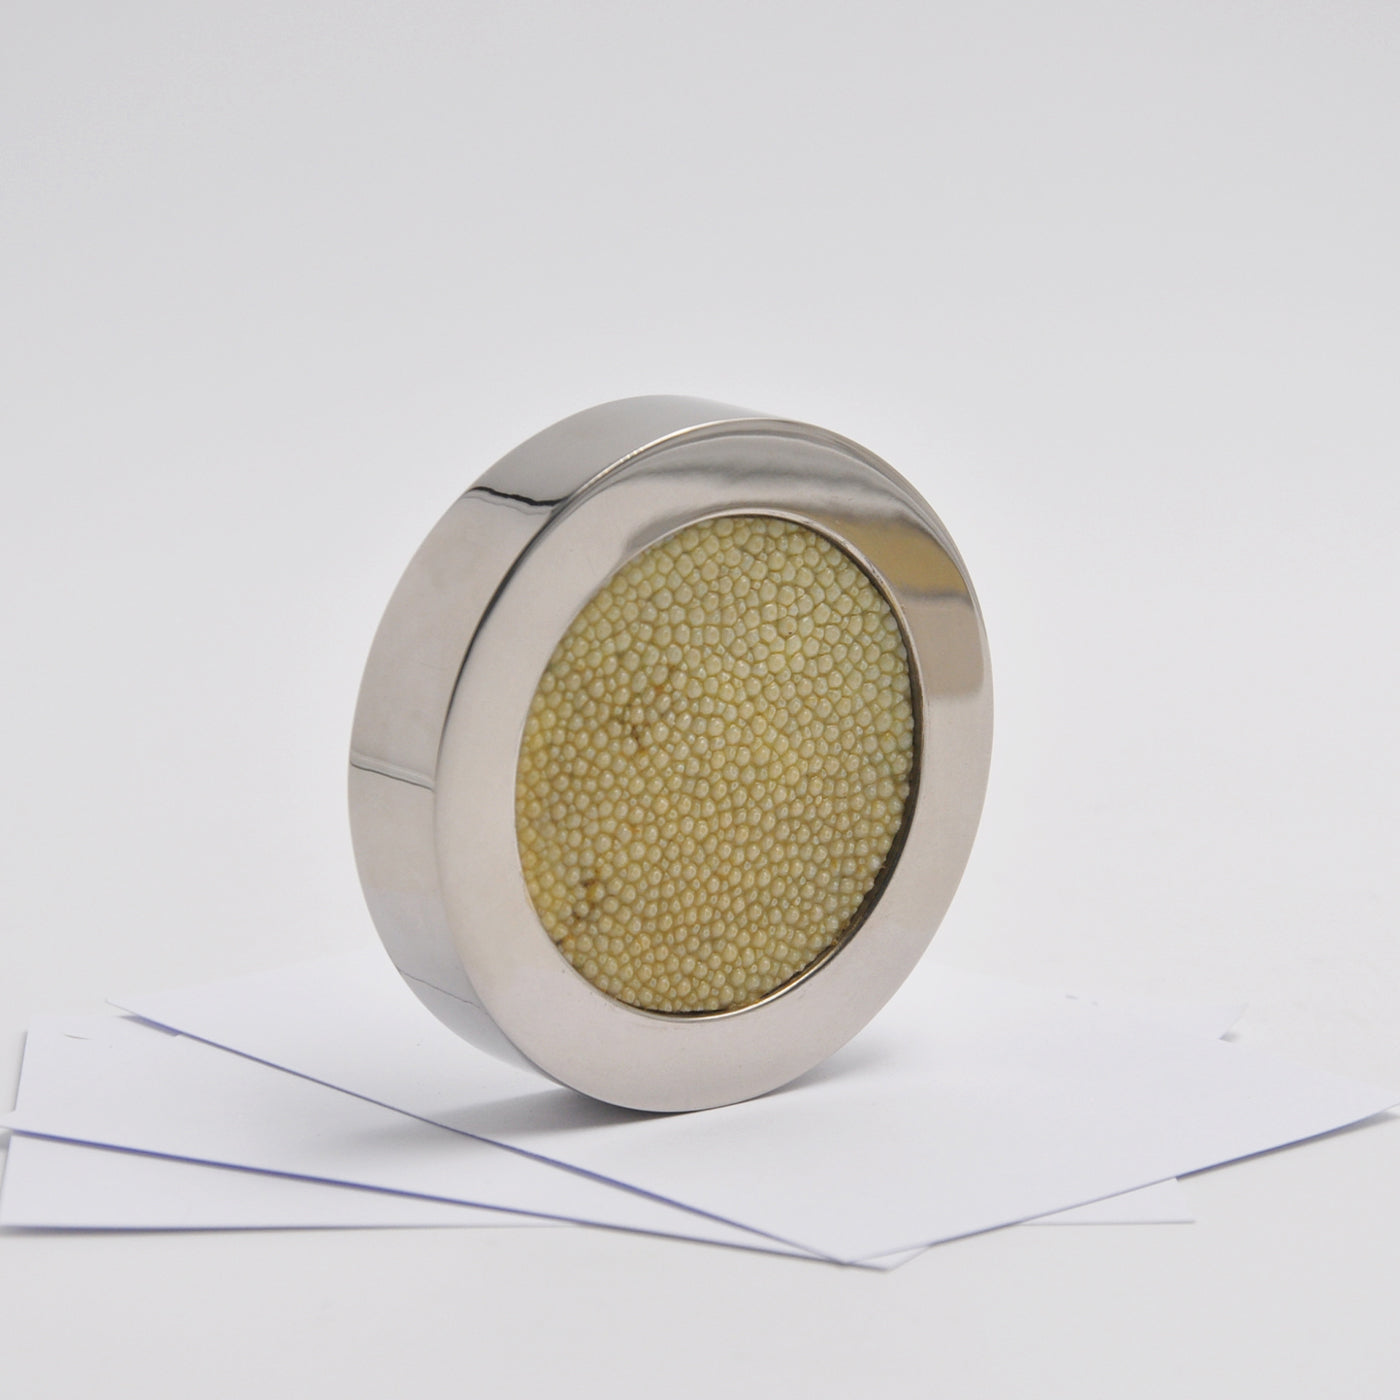 Circular Light-Green Shagreen Leather Paperweight by Nino Basso - Alternative view 1